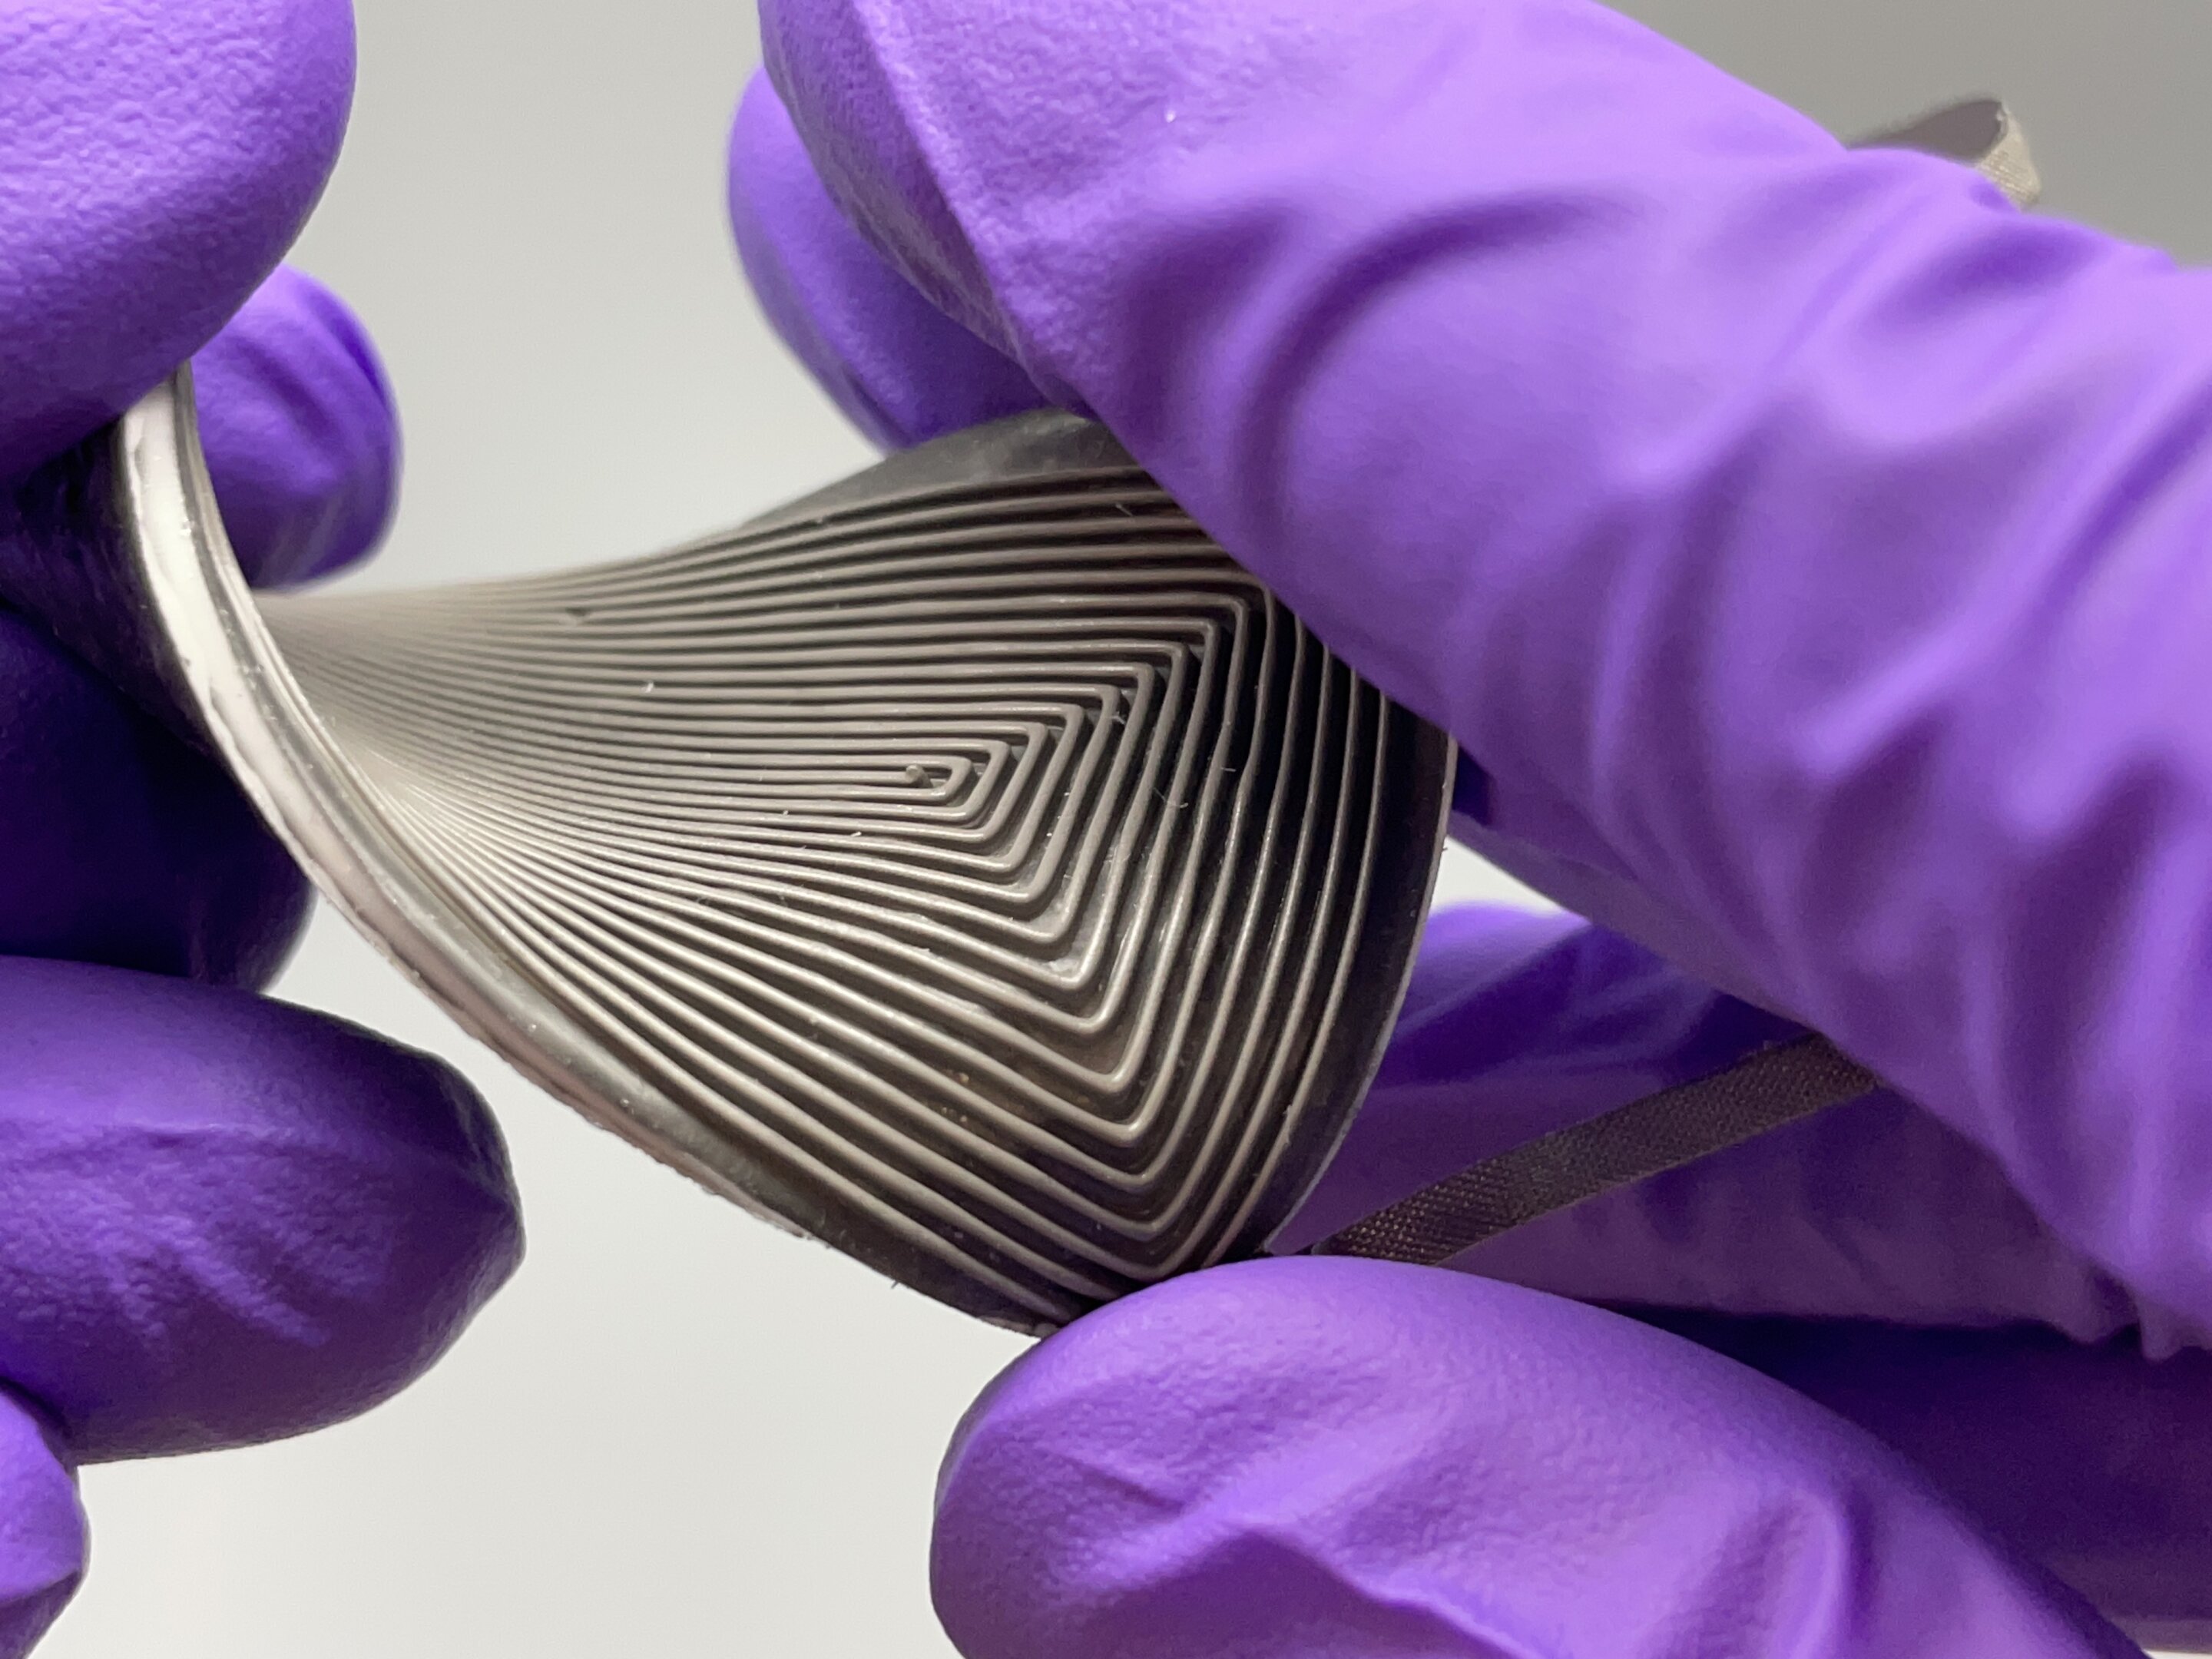 #A flexible device that harvests thermal energy to power wearable electronics